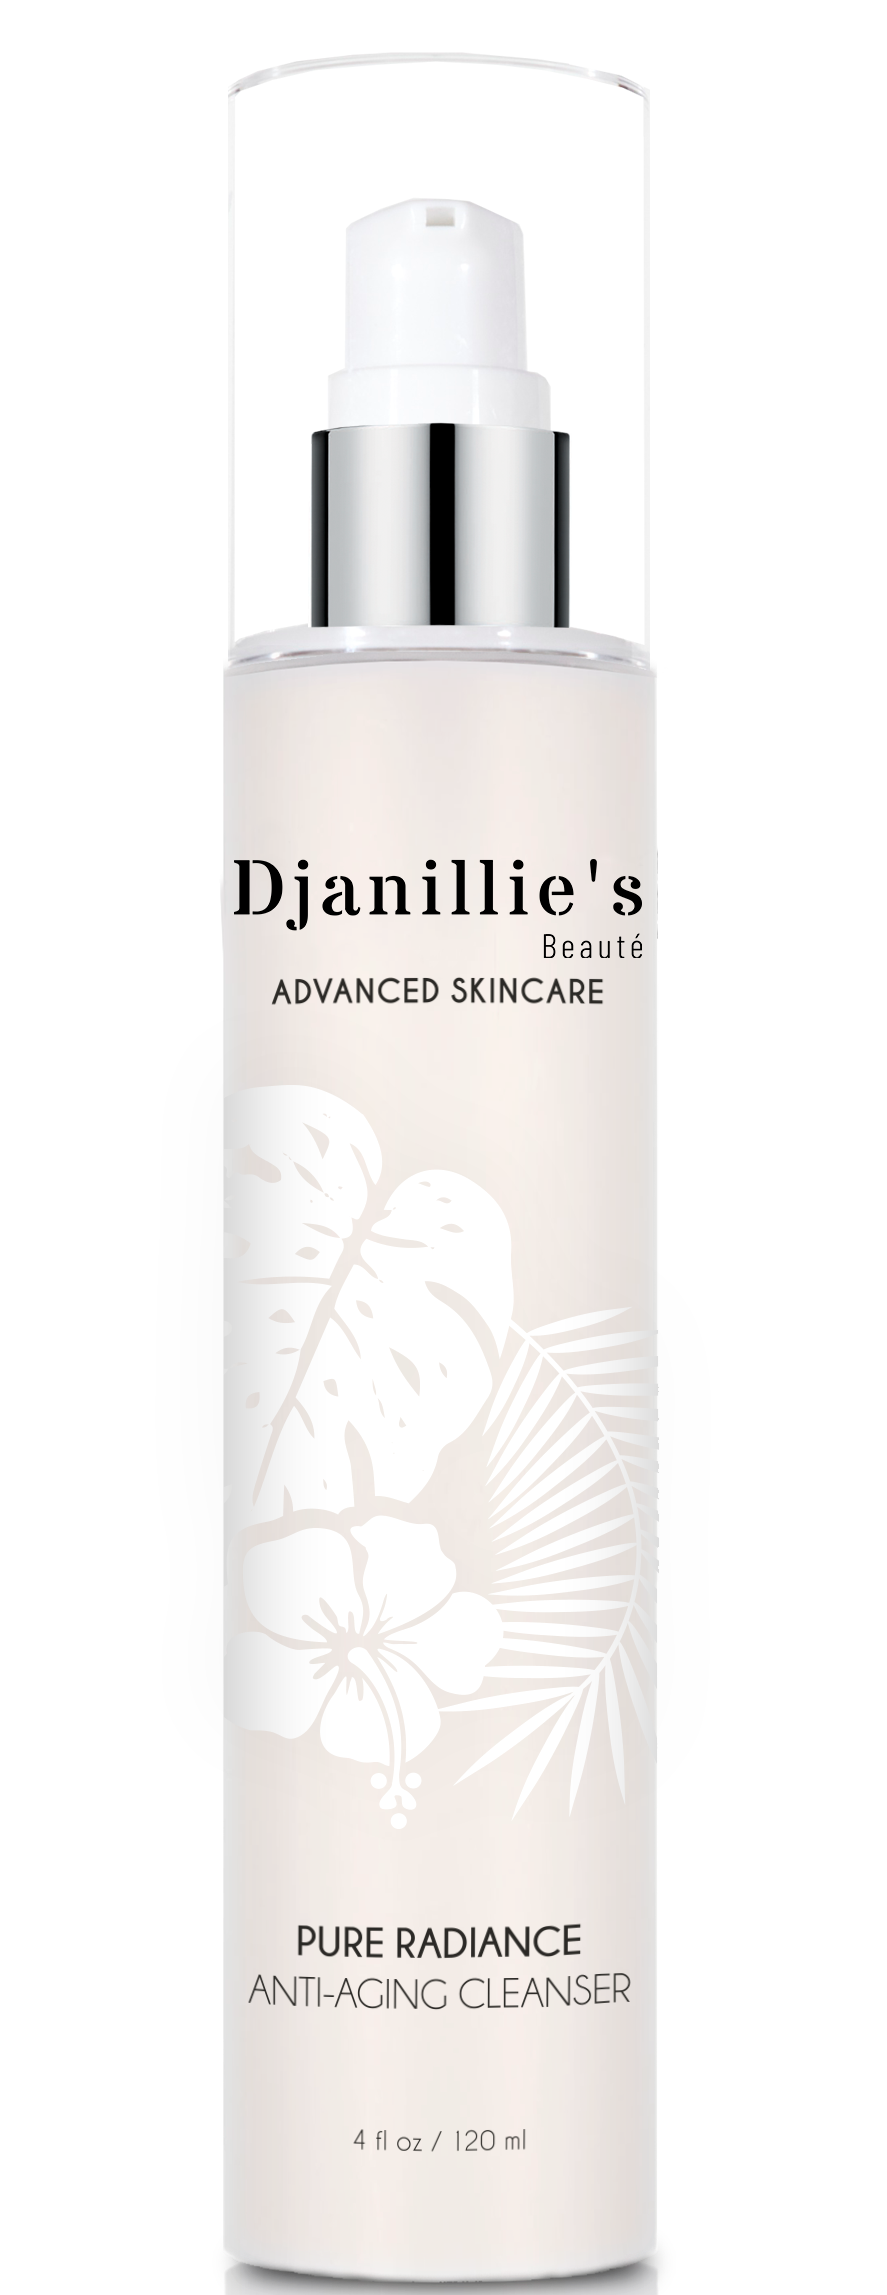 Pure Radiance Anti-Aging Cleanser - Djanillie's Beauté